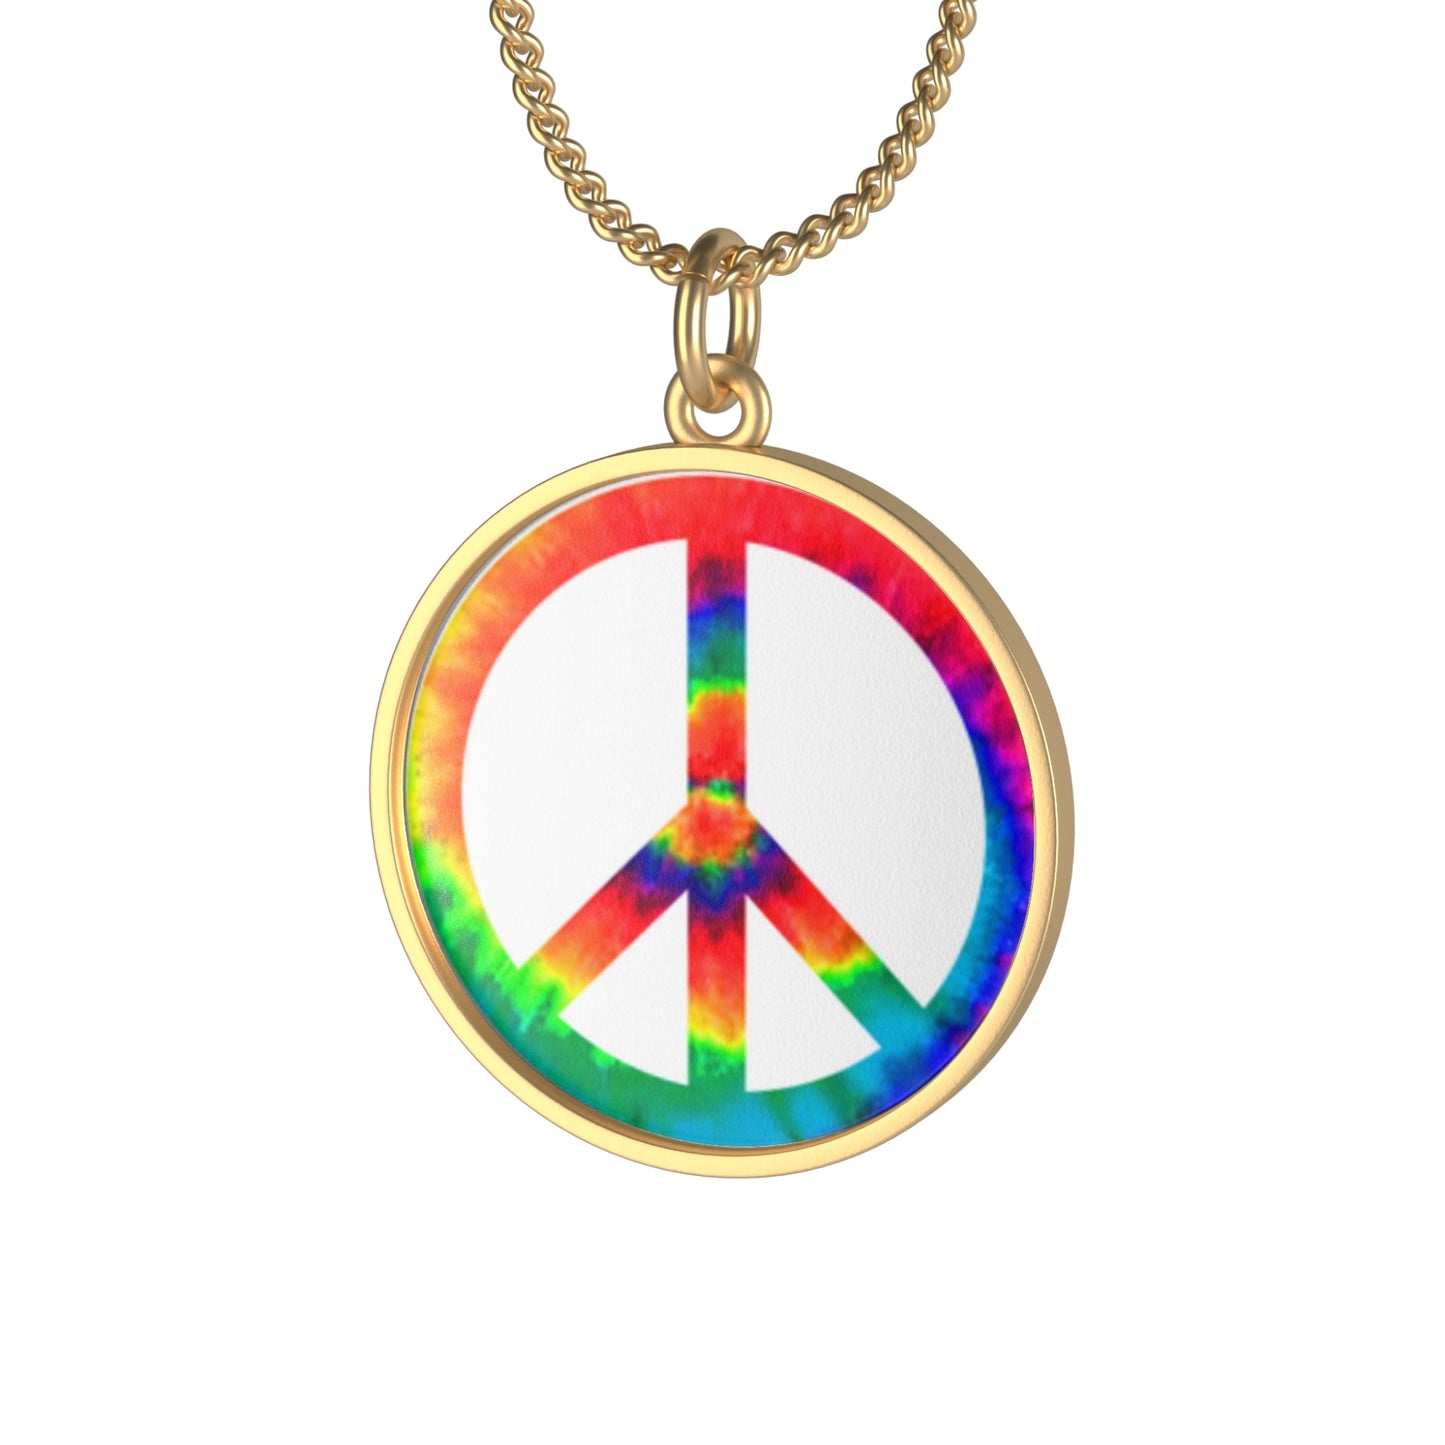 Tie Dye Peace Sign Single Loop Necklace / liberal / open minded / gift / silver / gold / cool / hippie / boho / bohemian / unisex